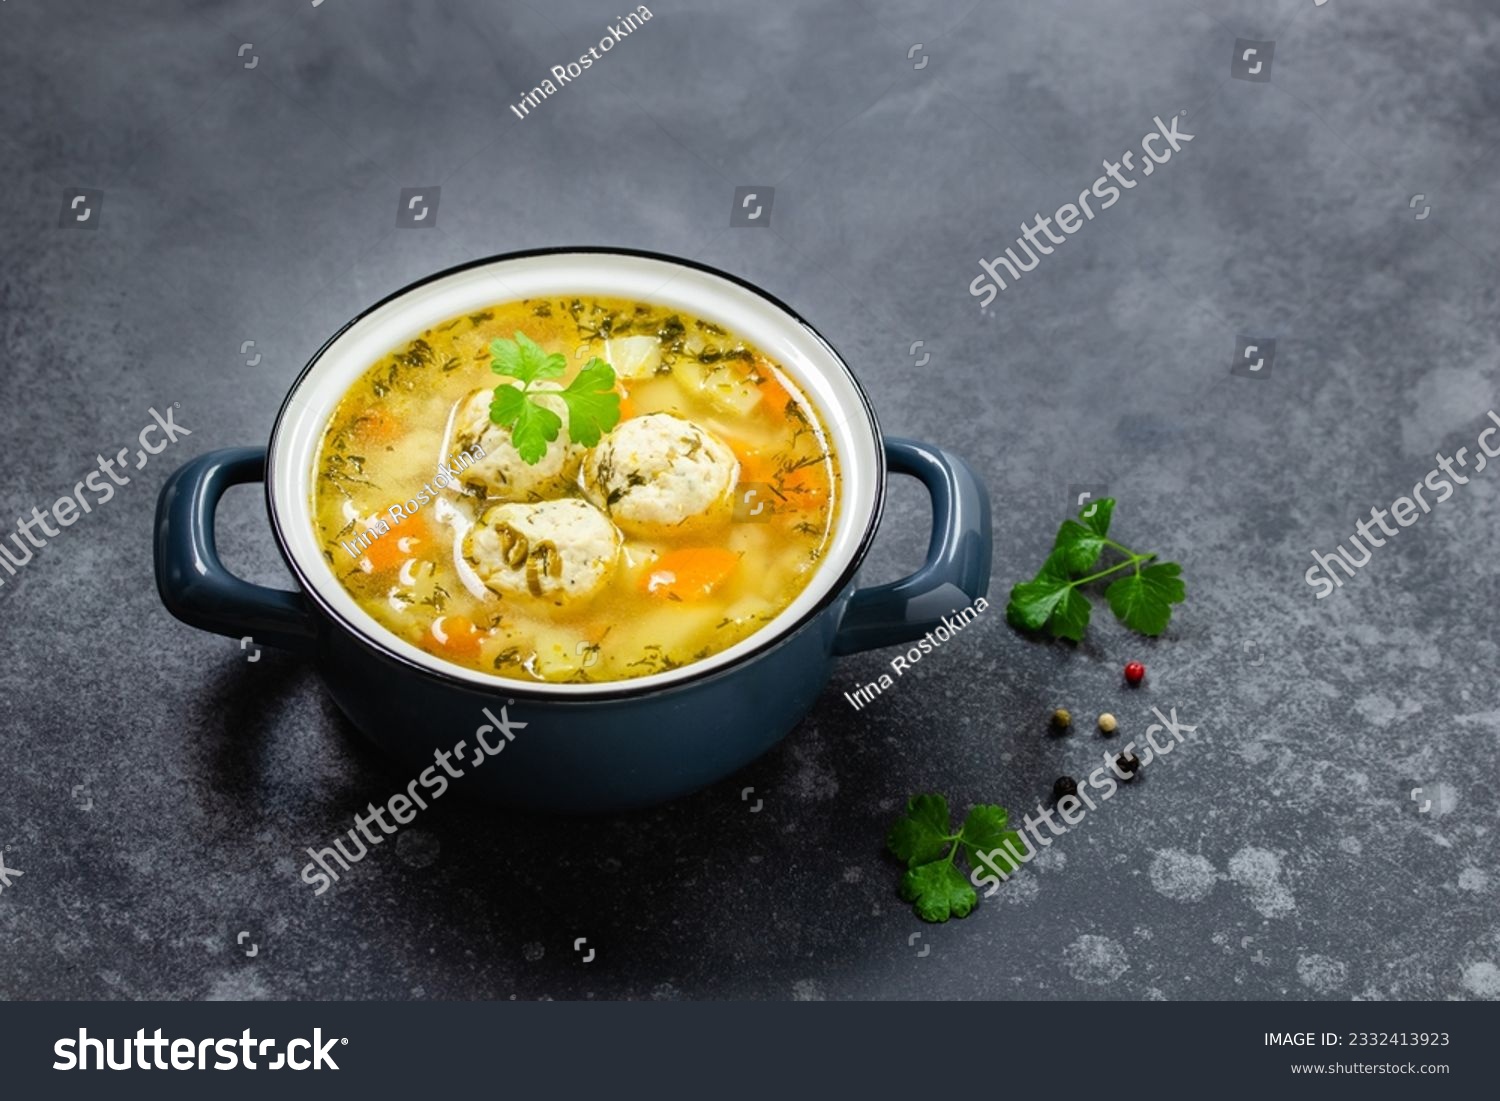 Summer low calorie meatball soup in pot on dark background. Top view, copy space, flat lay. #2332413923